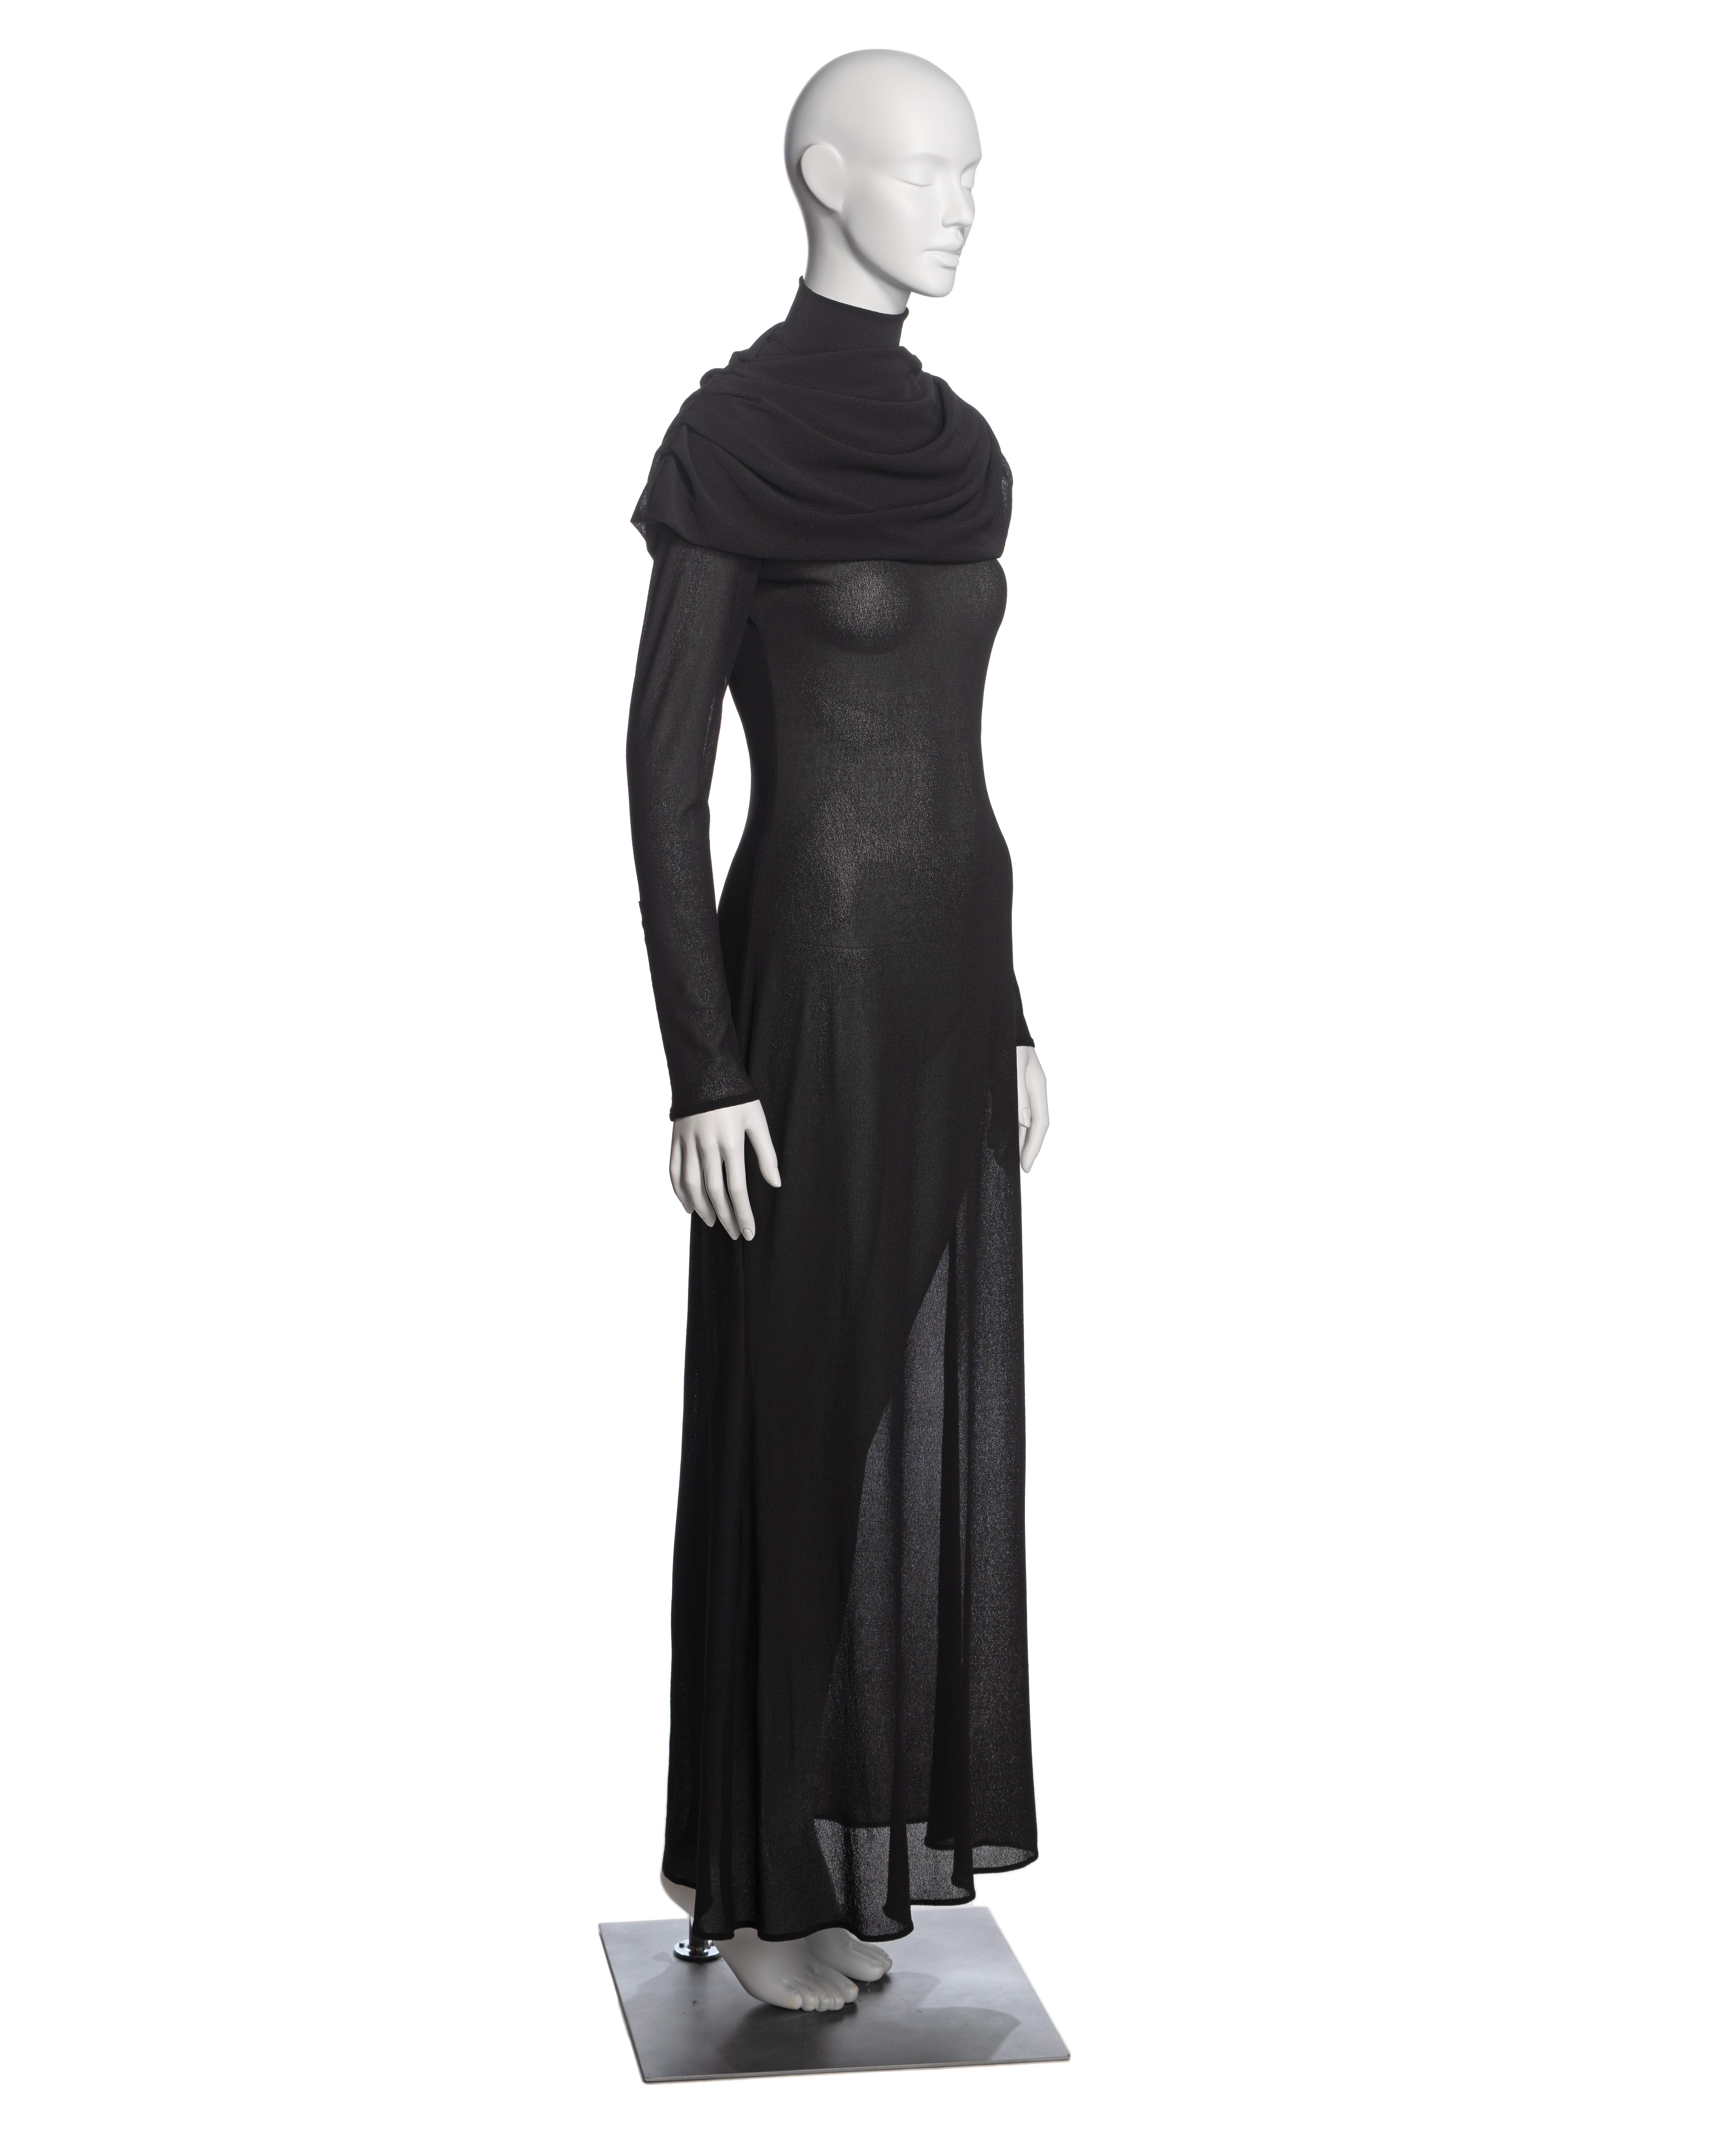 Alexander McQueen Black Mock Neck Evening Dress with Draped Cowl, 'Joan' FW 1998 For Sale 1